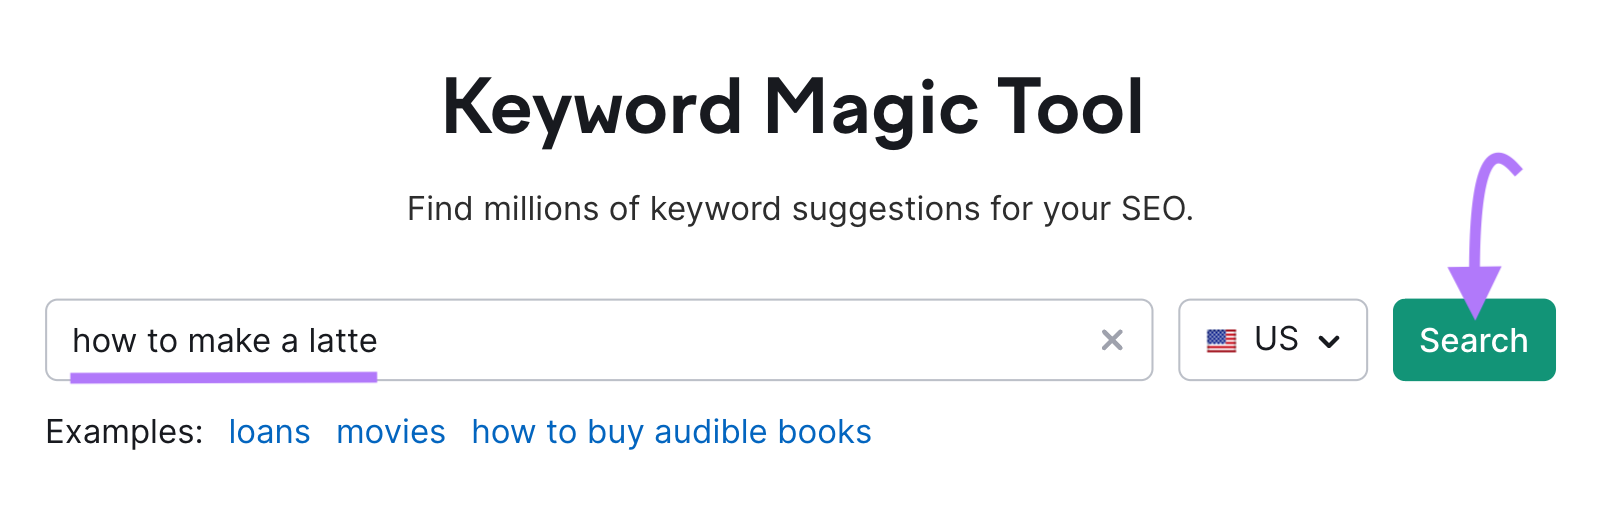 "how to make a latte" entered into Keyword Magic Tool search bar